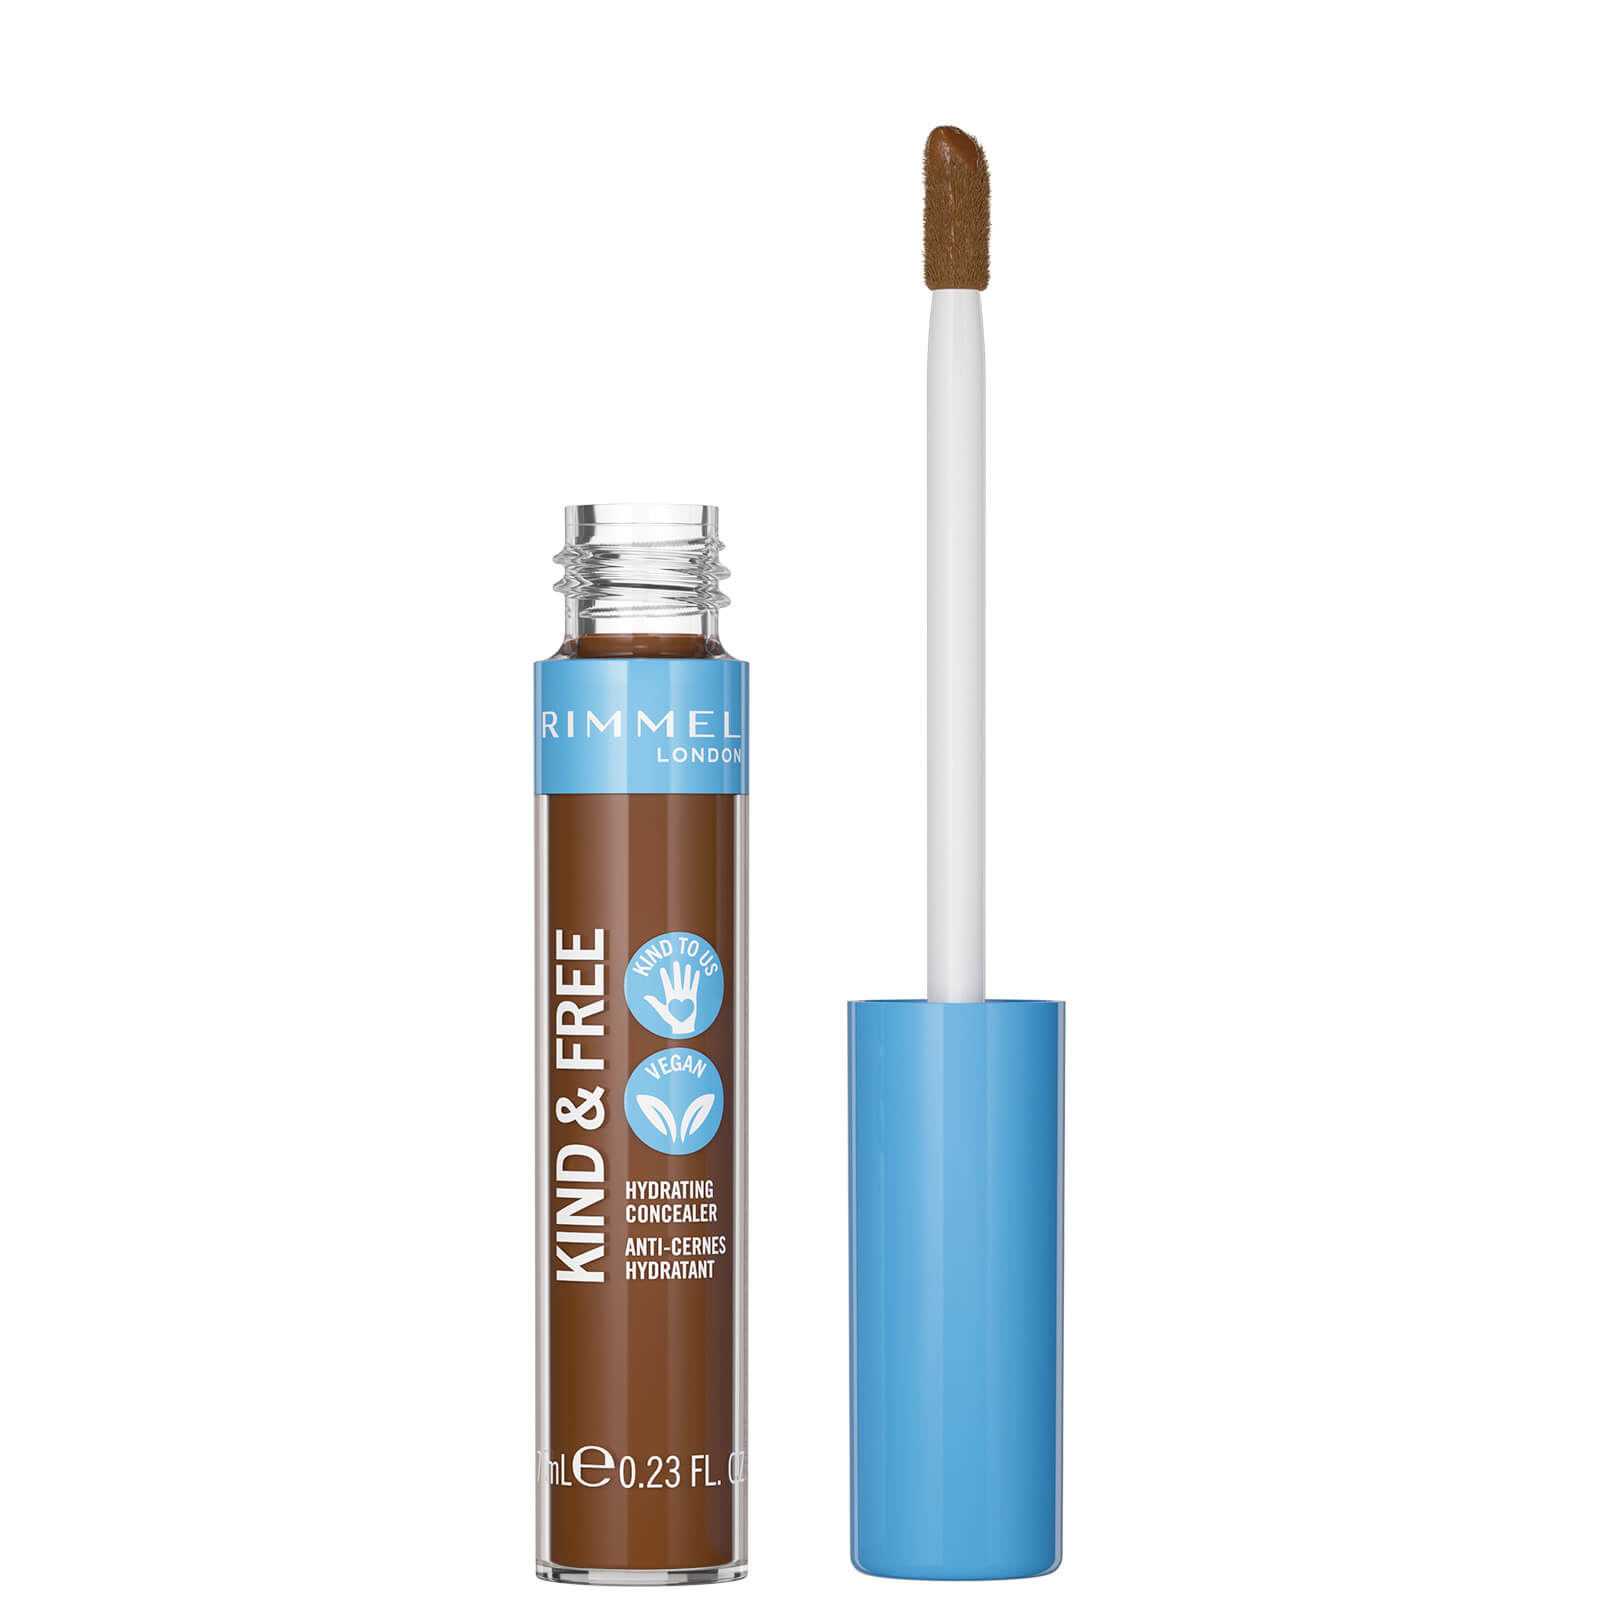 Rimmel Kind and Free Hydrating Concealer 7ml (Various Shades) - Deep von Rimmel